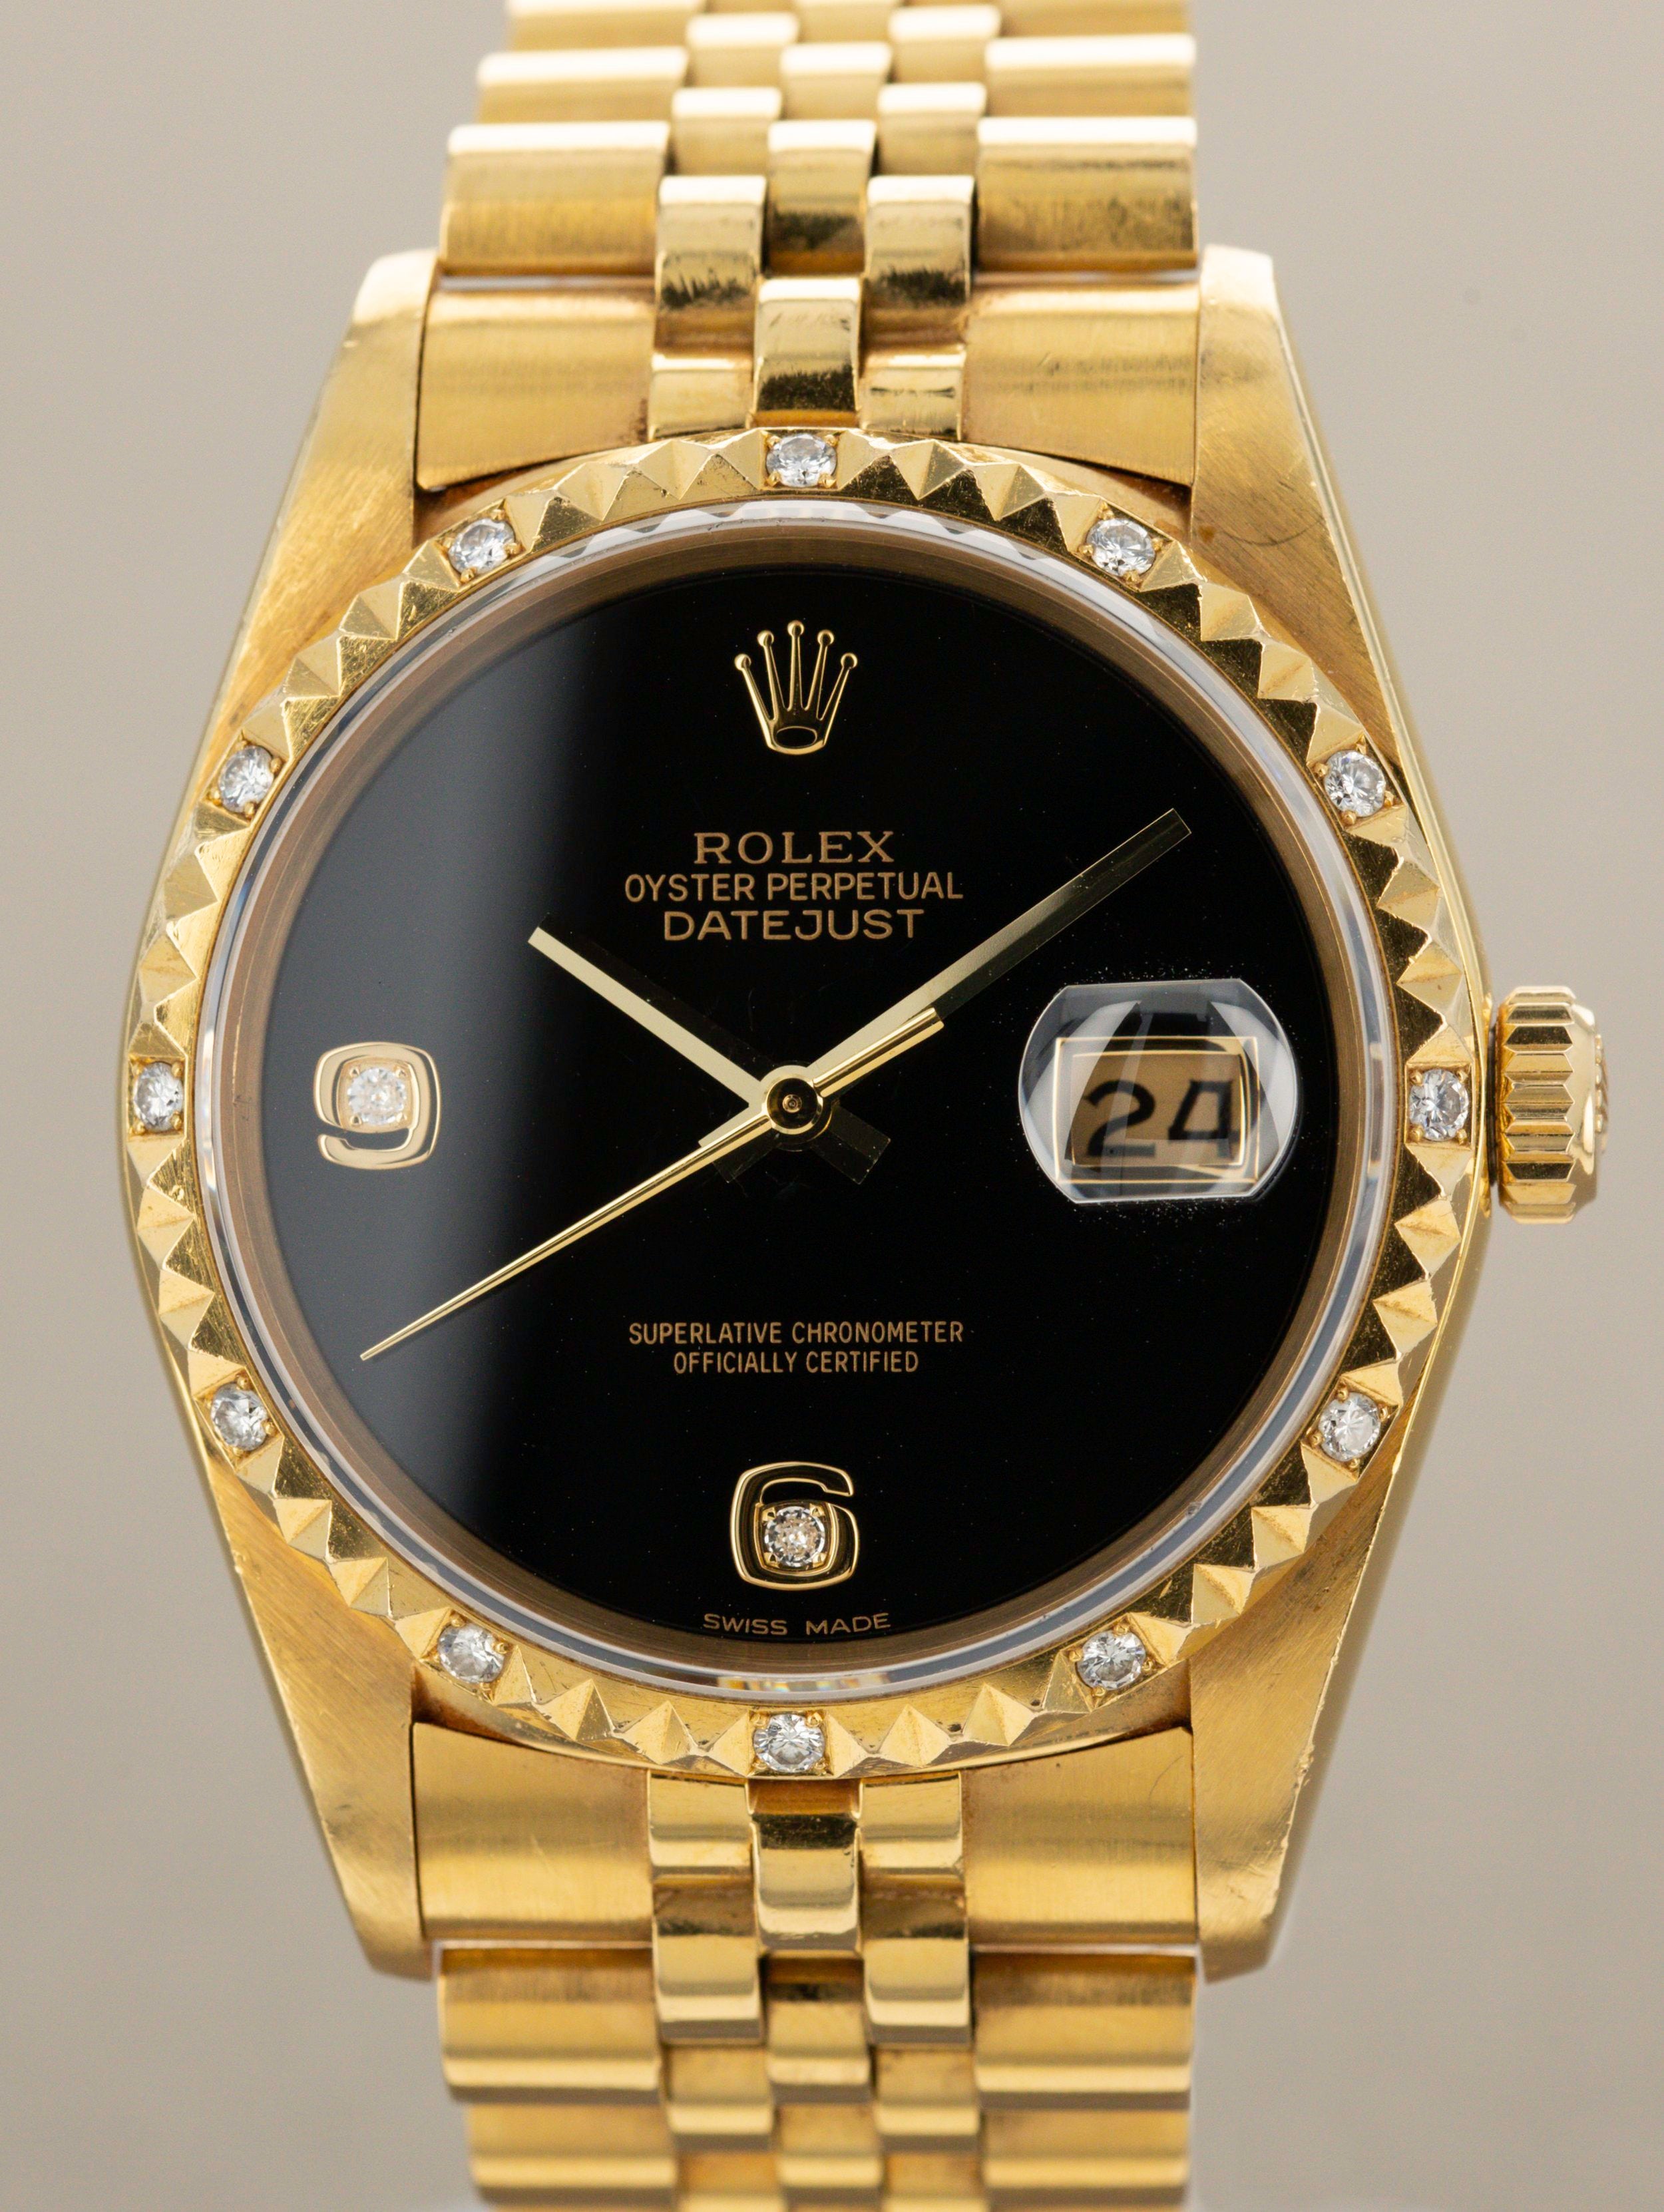 Rolex Datejust Ref. 16058 - Pyramid Bezel, and Onyx Dial with Diamond Indices